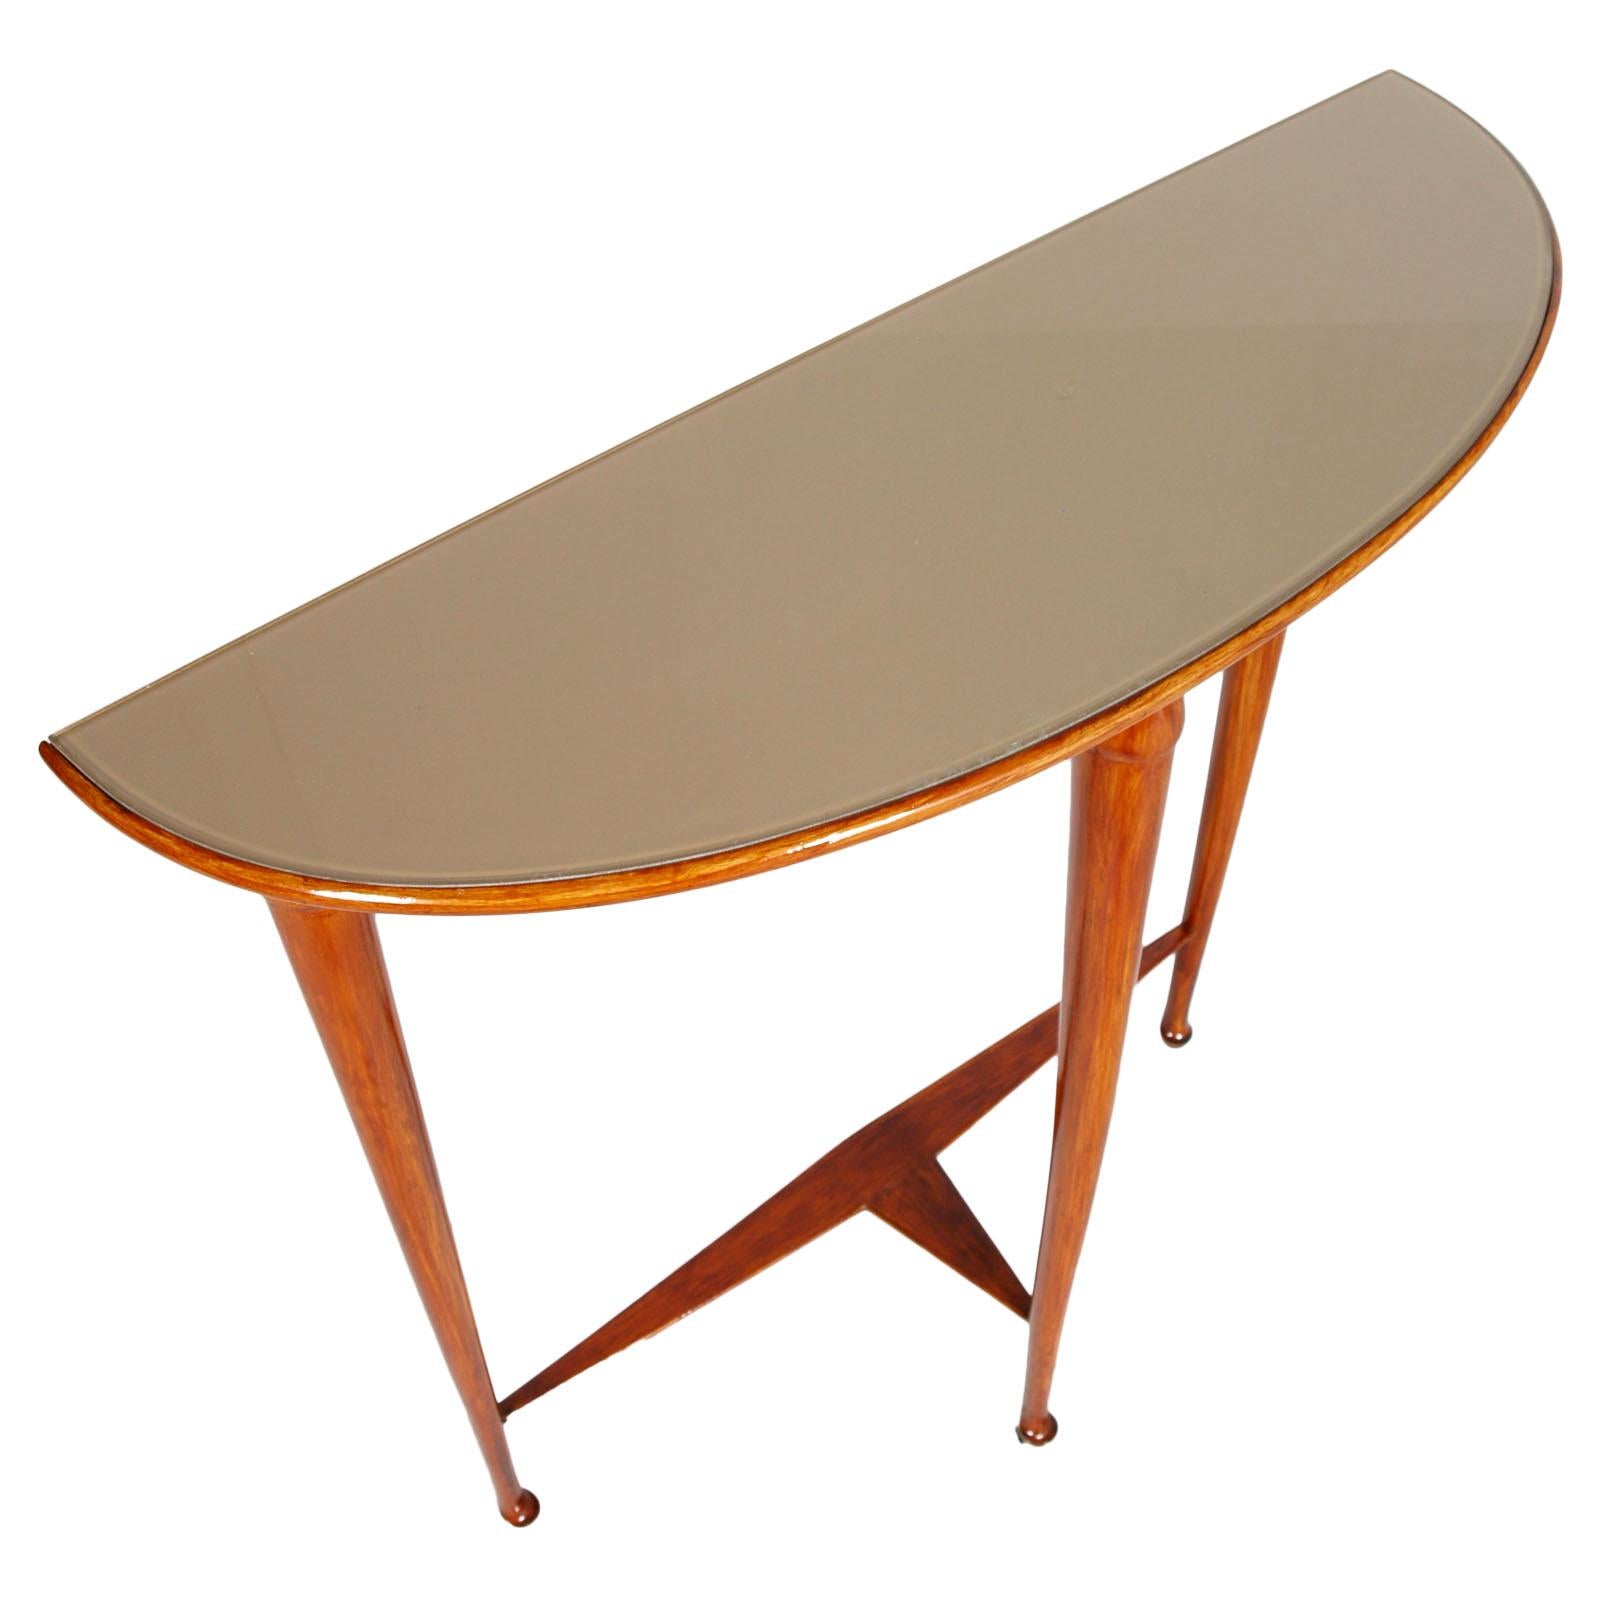 Lacquered 1930s Console and Mirror Gio Ponti Design Attributable in Walnut, Wax-Polished